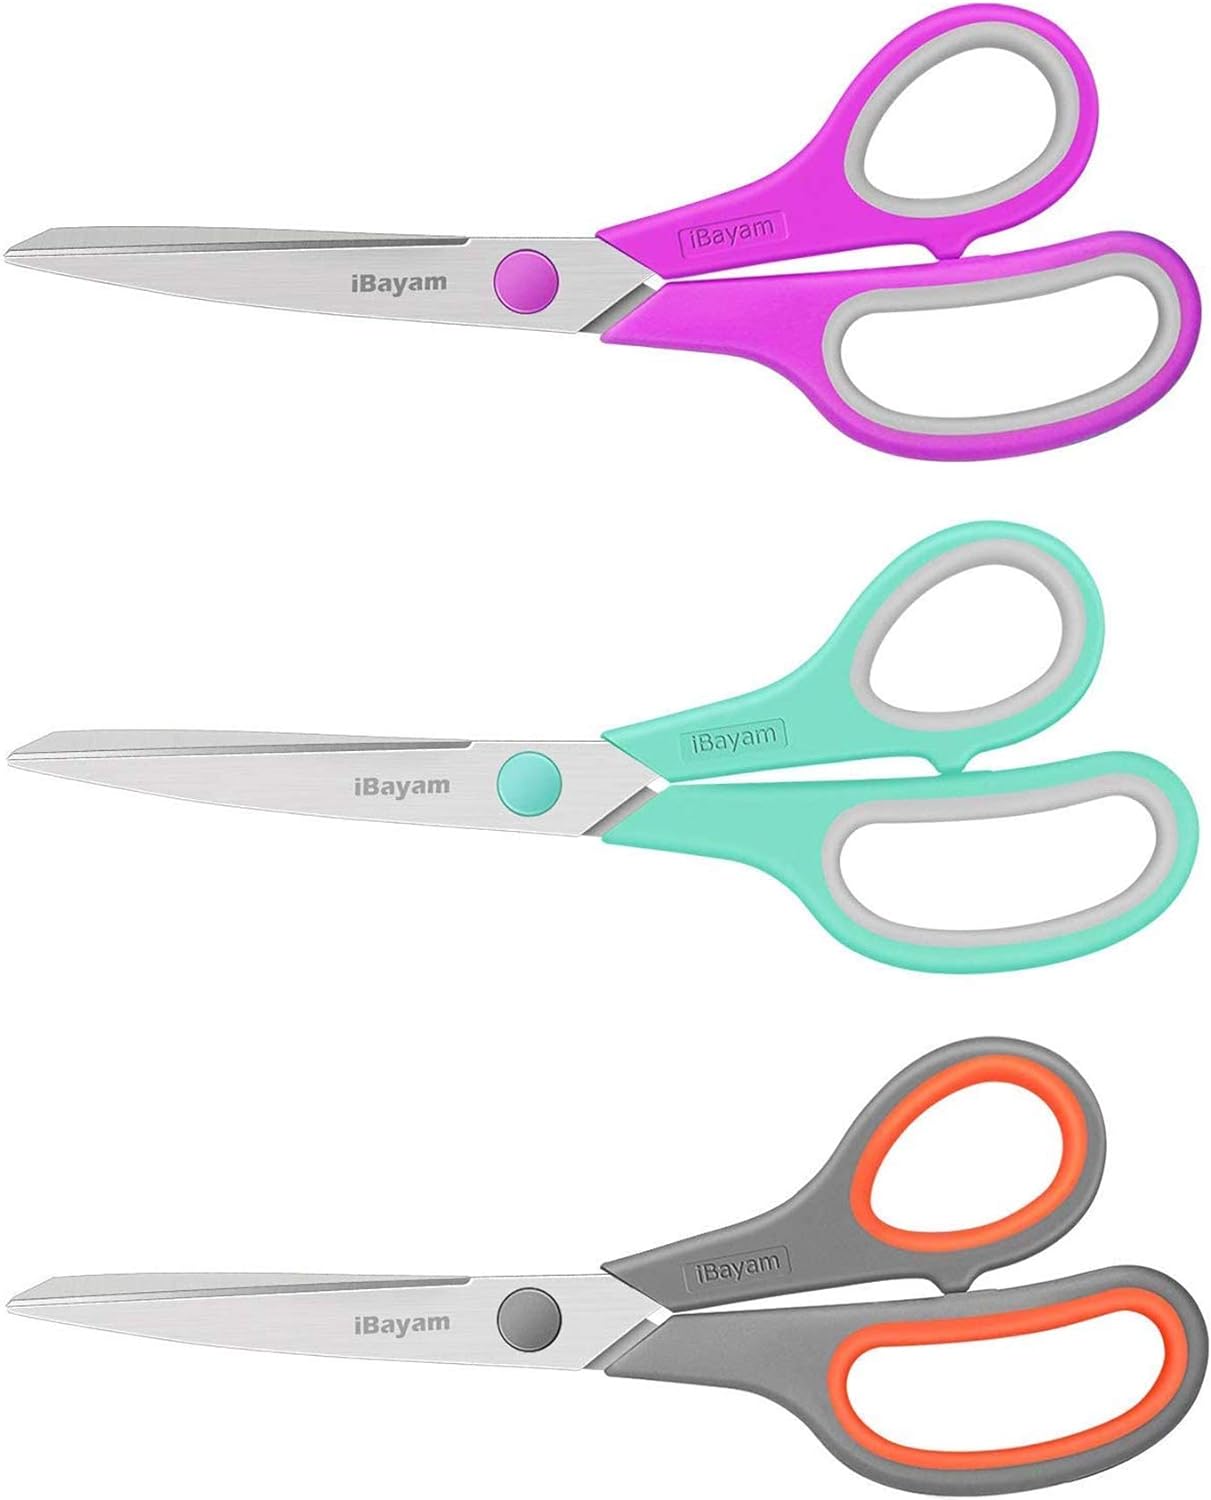 I love these scissors so much, they are a real game changer. They are super sharp and the handles are easy to grip which helps with hand fatigue. I use them a lot for my Etsy shop, they are great for cutting paper, fabric, yarn and so much more.Having three scissors in one pack is incredibly convenient. I can keep one in my crafting area, one in the kitchen for various household tasks, and another in my office for everyday use. Plus, with multiple pairs, I always have a backup handy in case one 